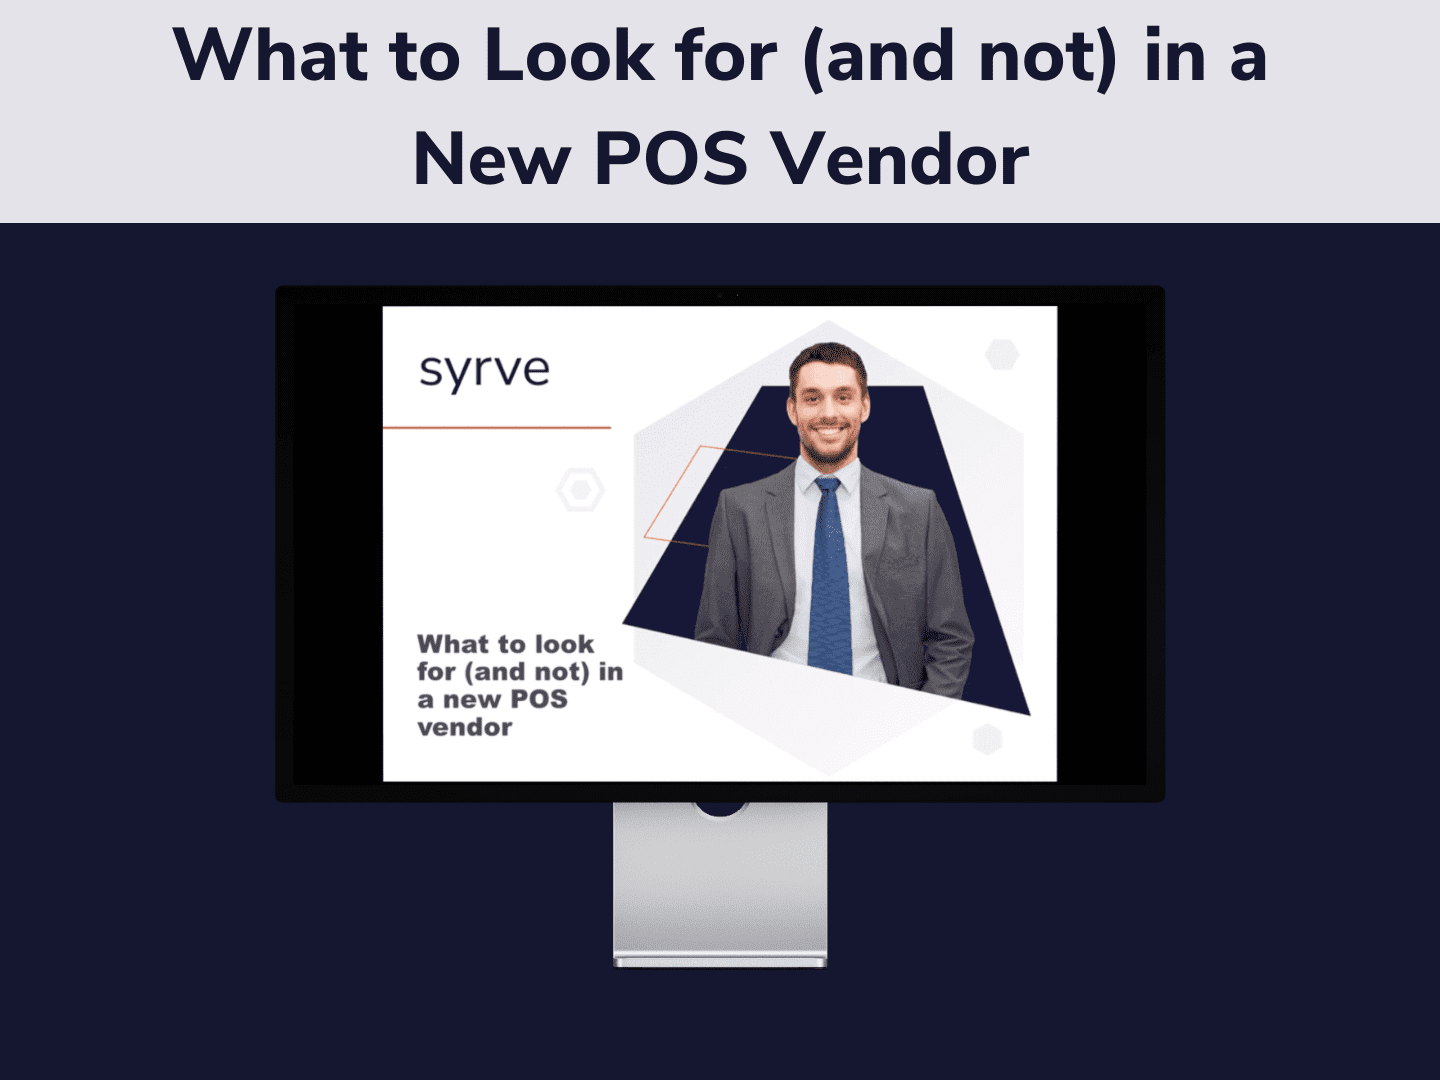 What to Look for (and not) in a New POS Vendor